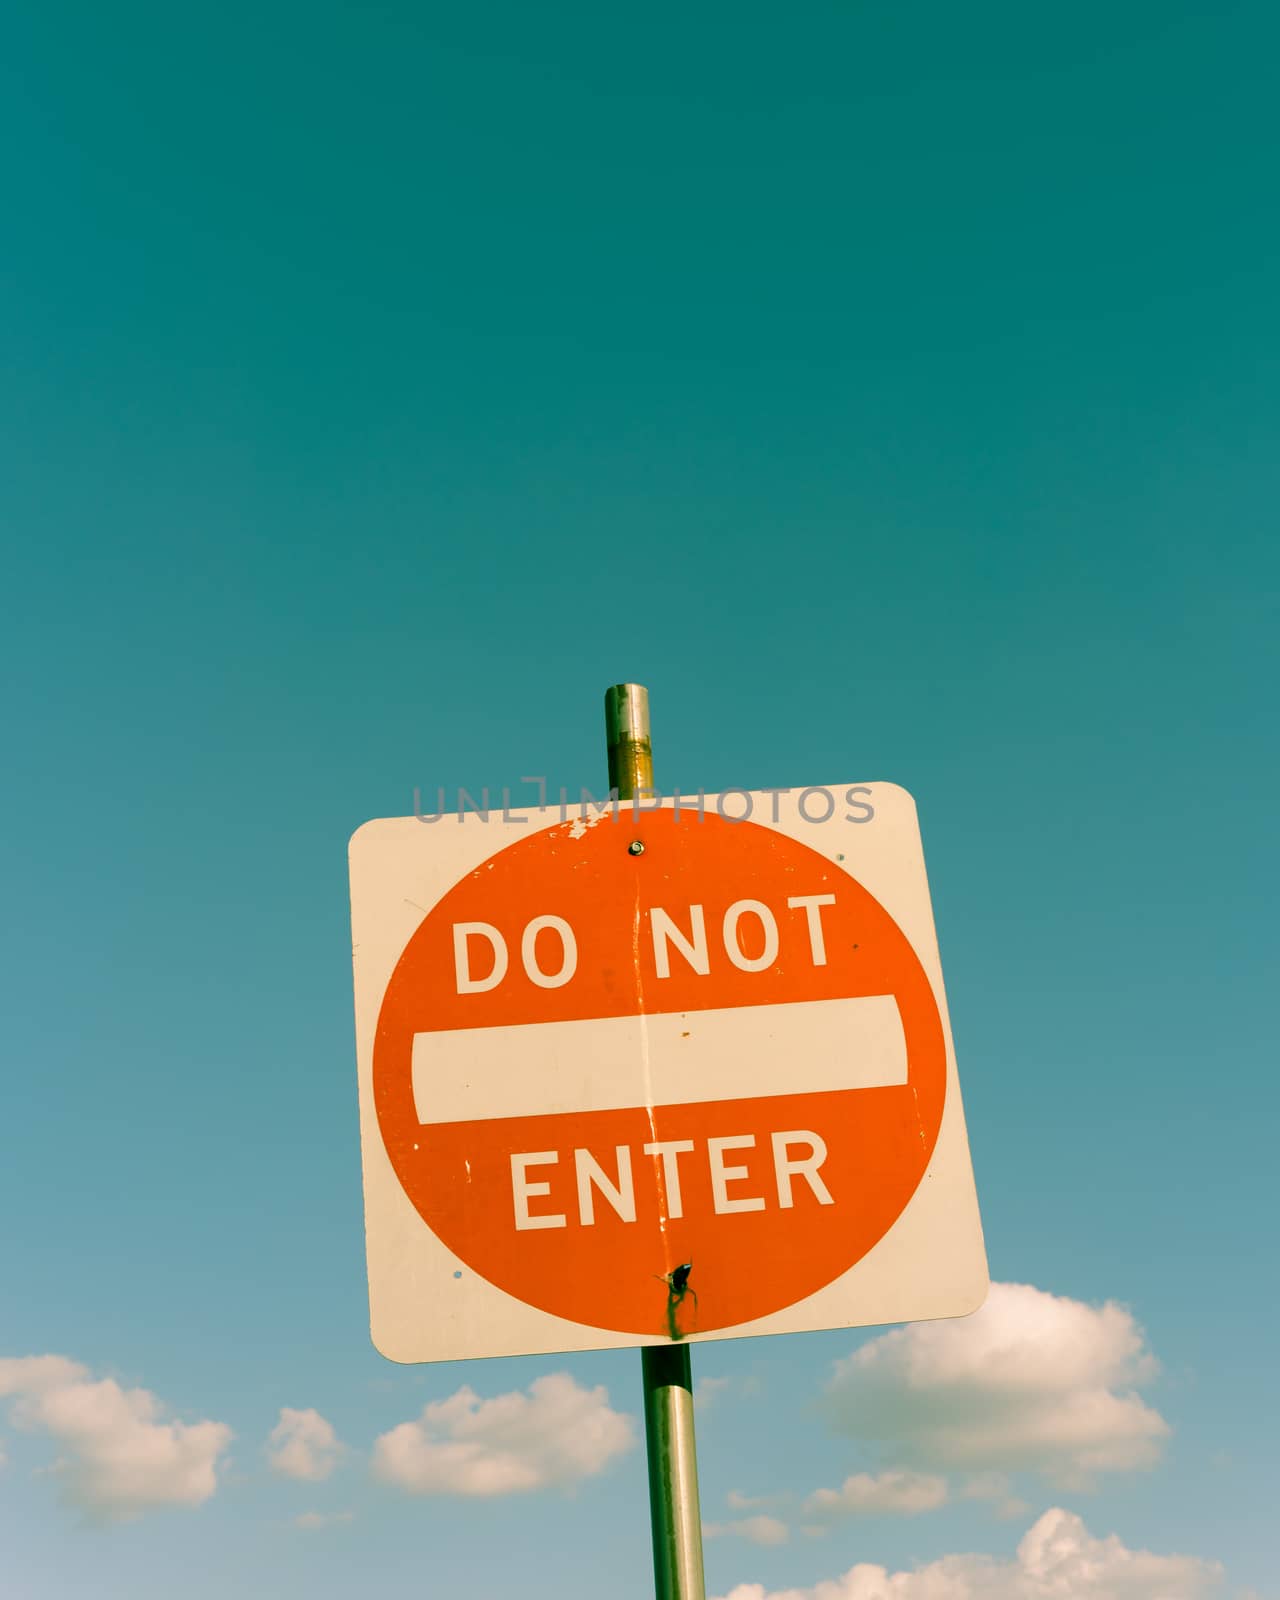 Filtered image close-up low angle view of do not enter sign under cloudy sky by trongnguyen